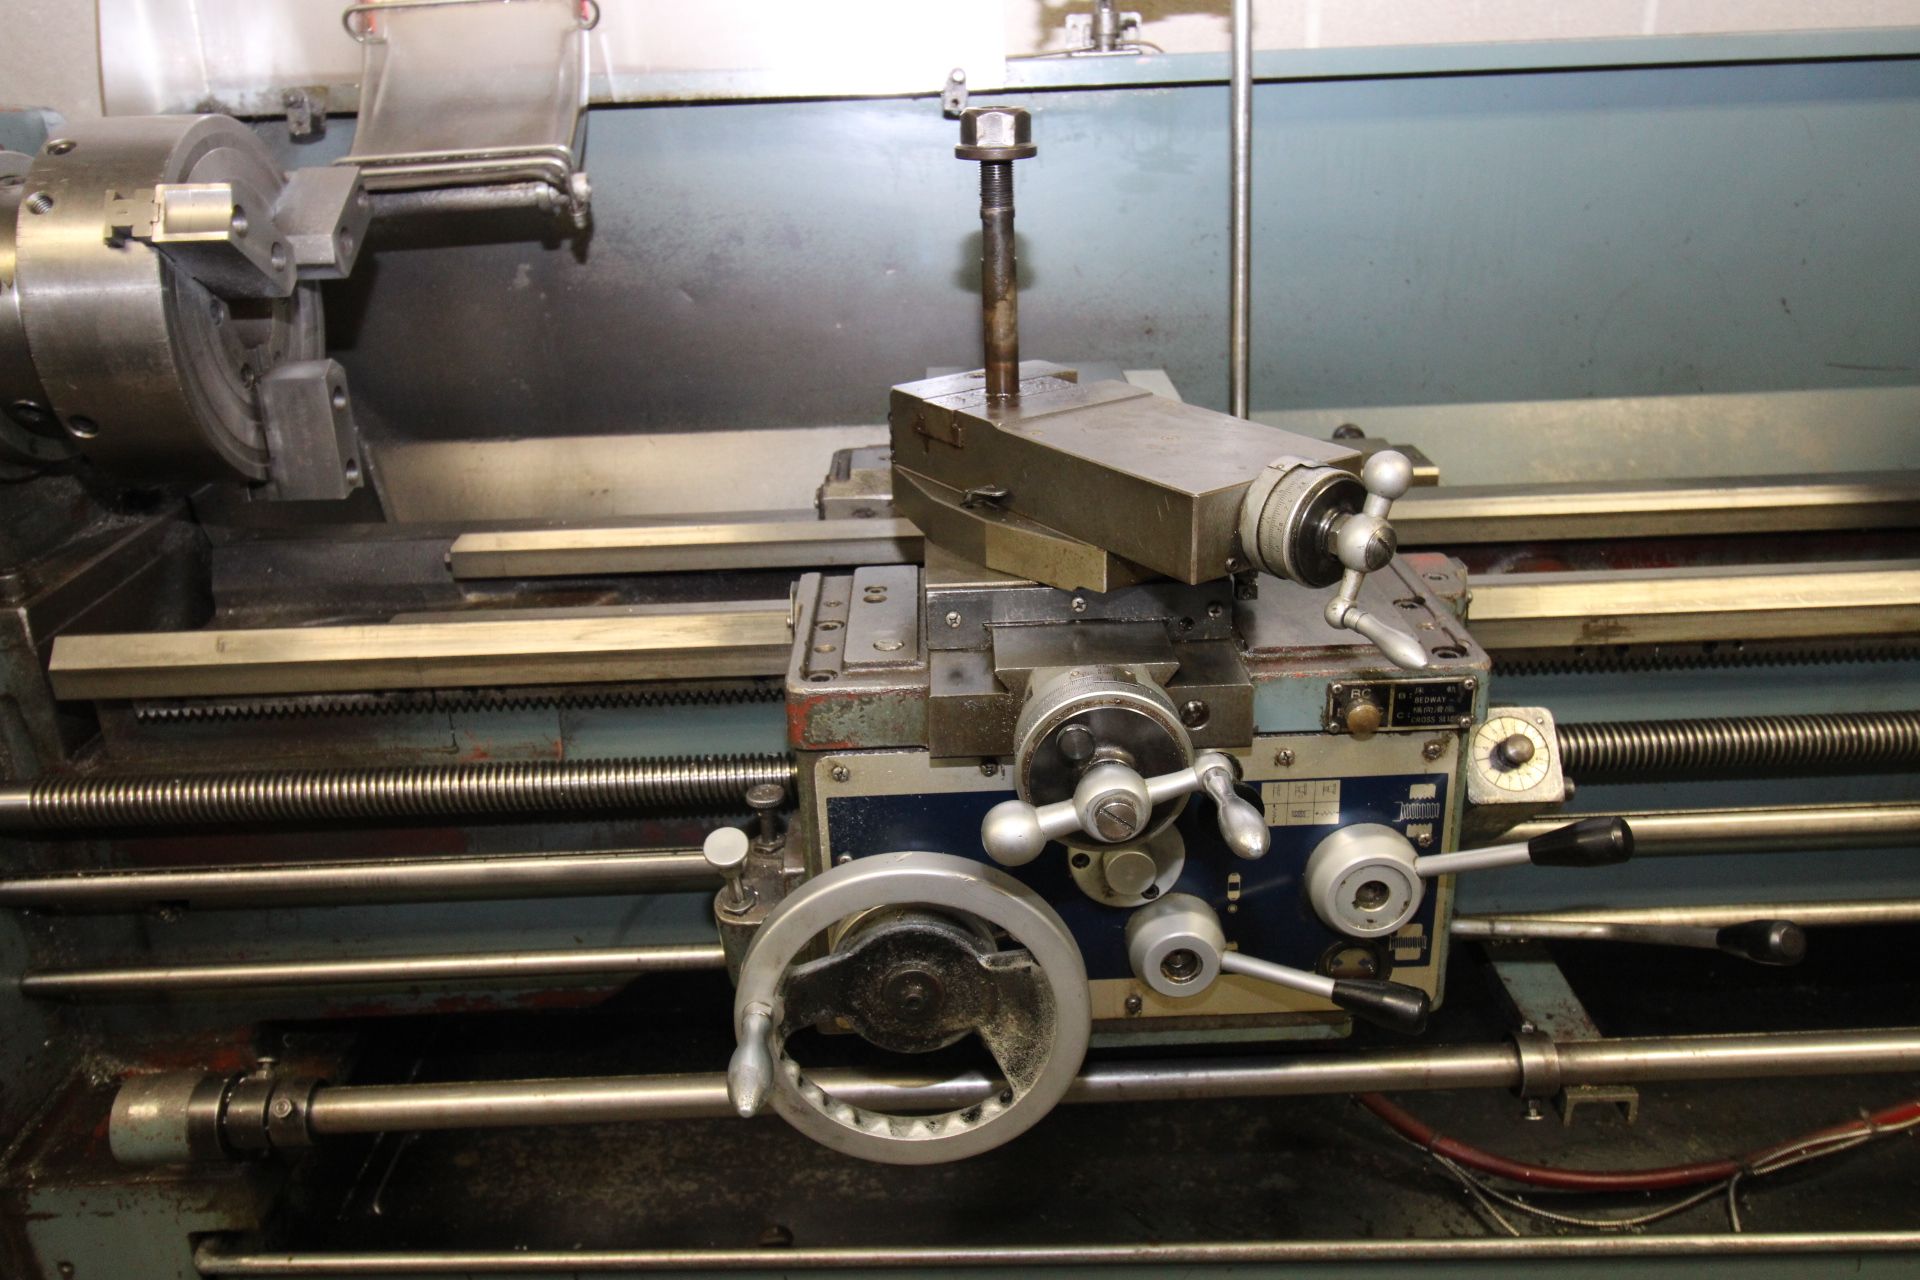 GAP BED ENGINE LATHE, KINGSTON 17” X 60”, new 2003, spds: 52-1350 RPM, 10” dia. 3-jaw chuck, 4-jaw - Image 5 of 15